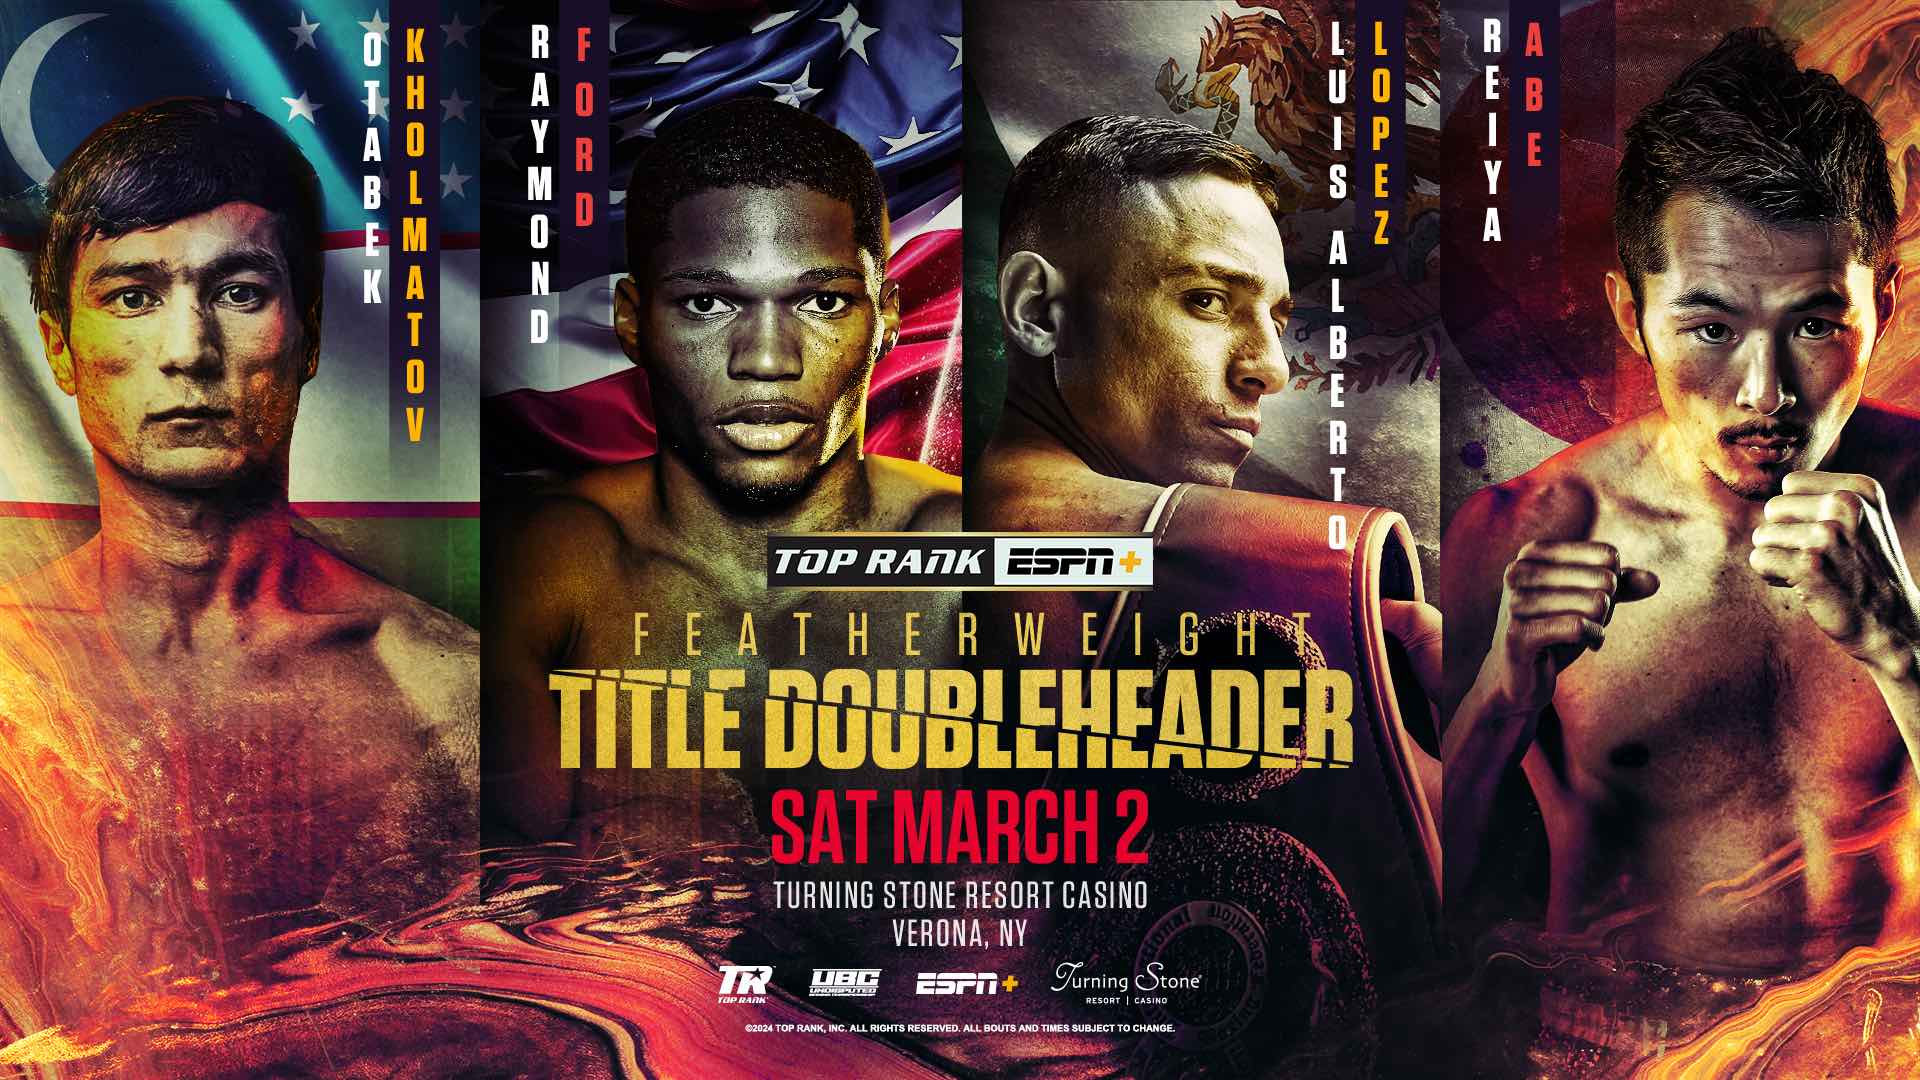 Two featherweight title fights land on March 2nd card